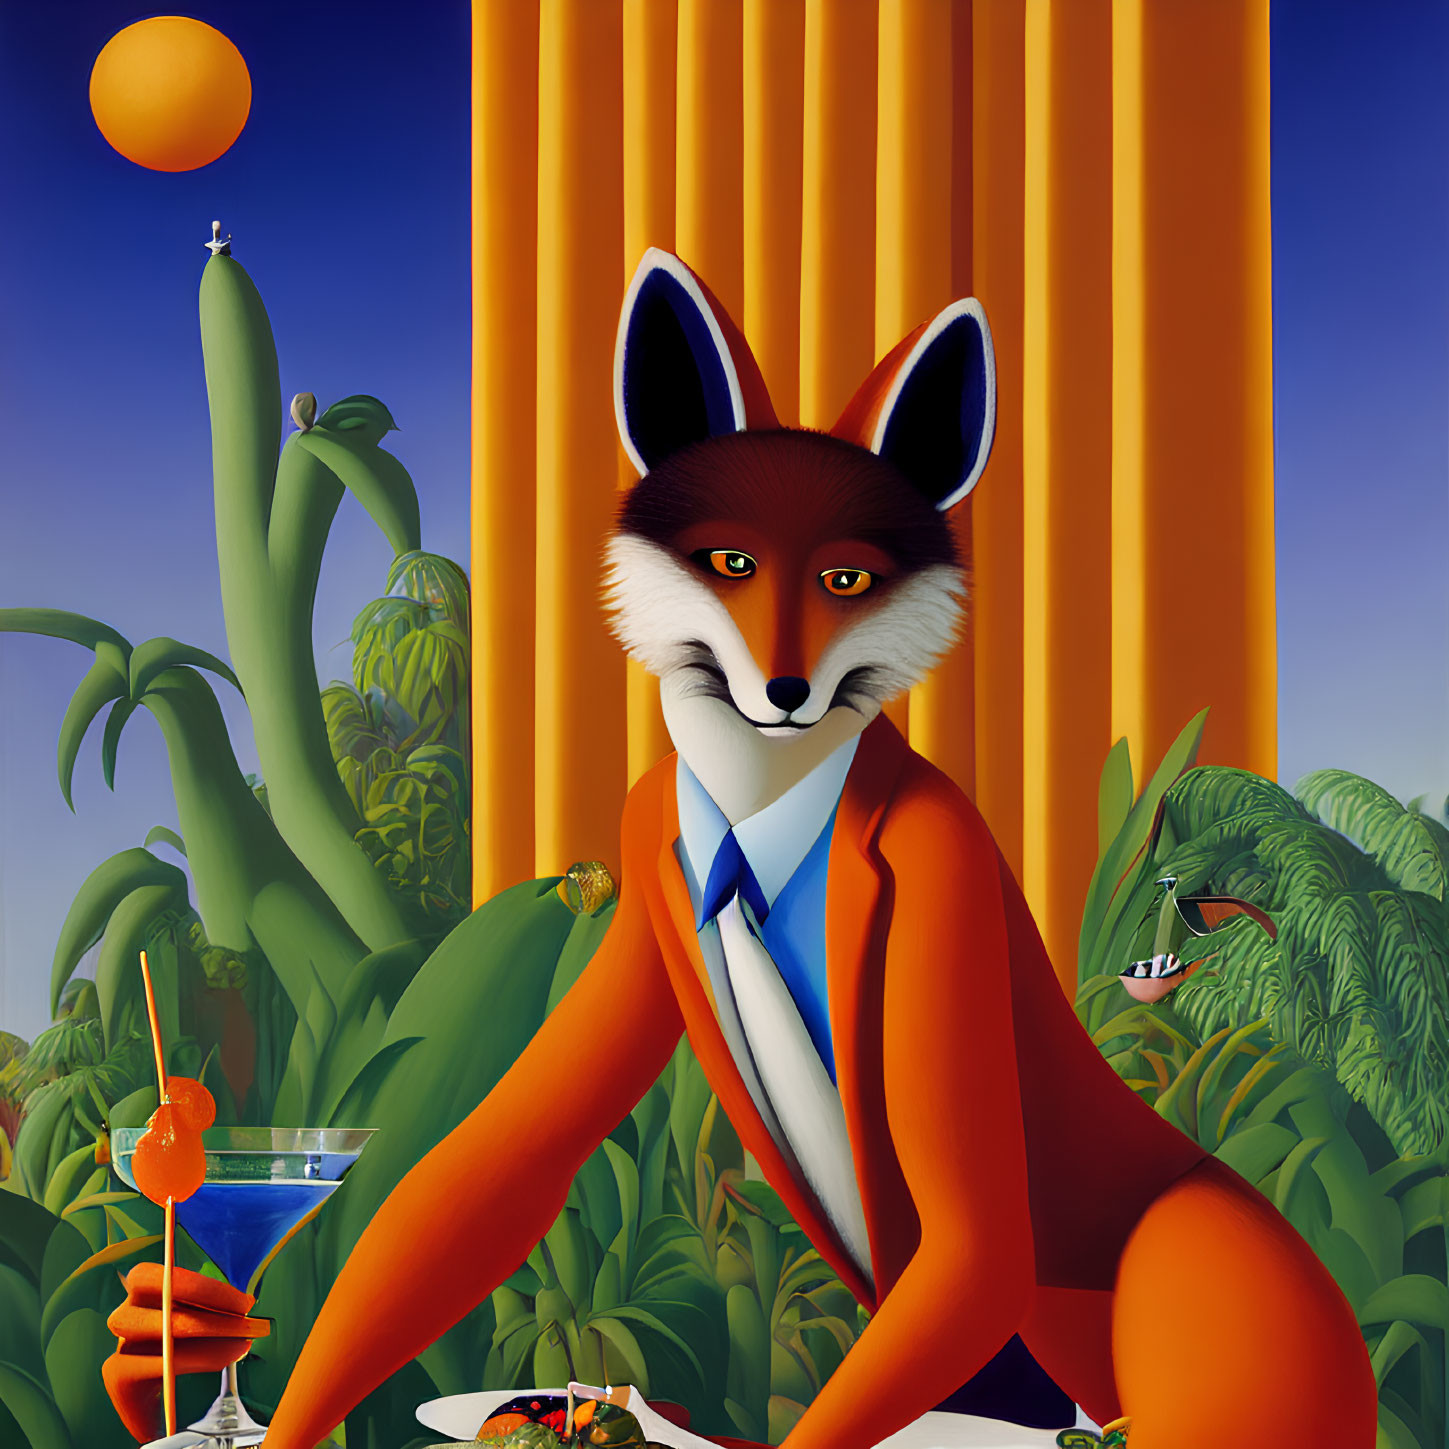 Anthropomorphic fox in suit with cocktail in surreal setting